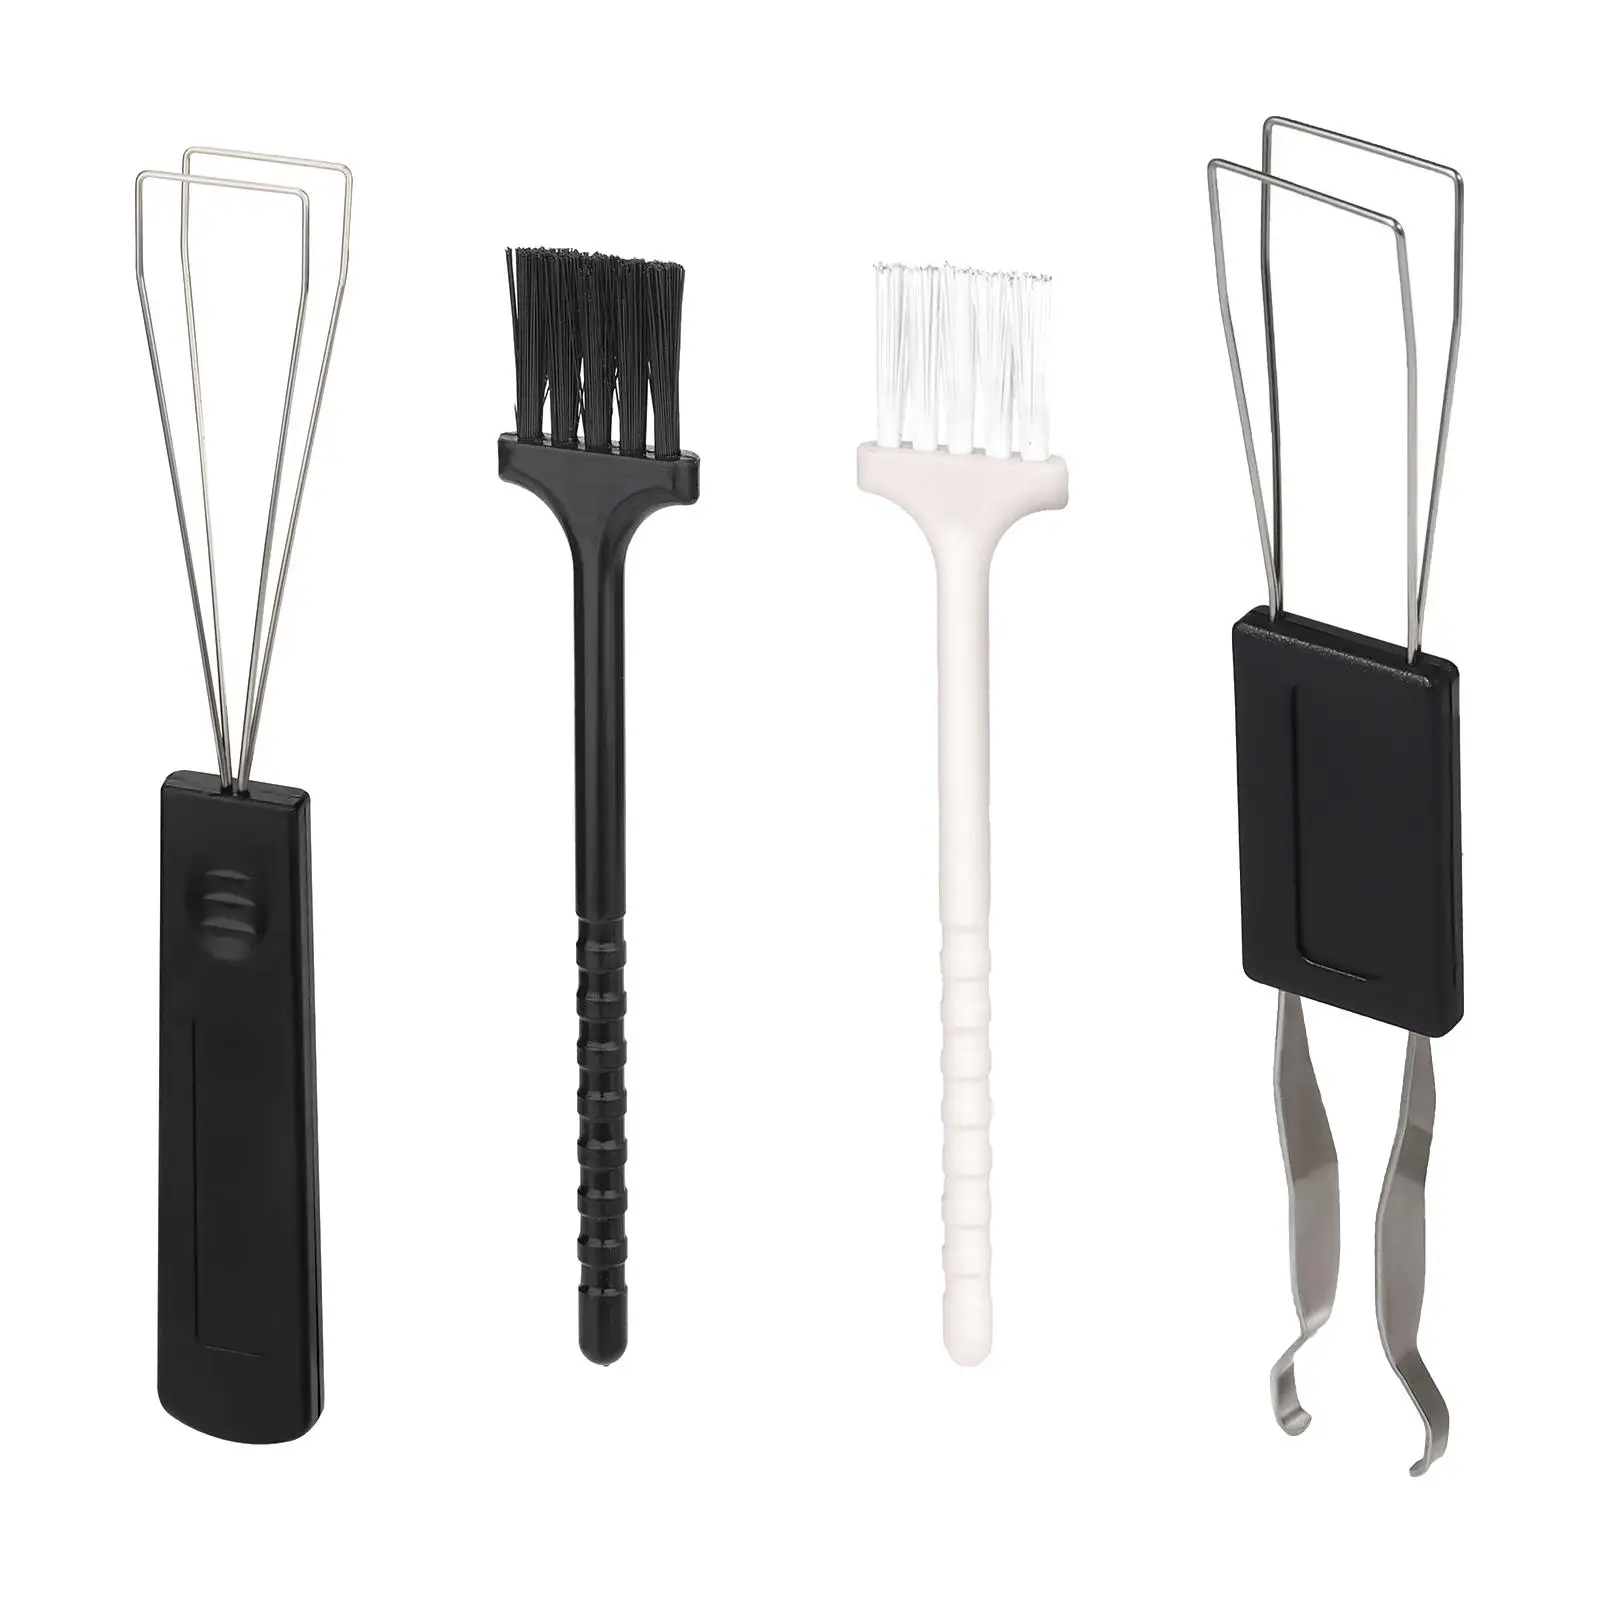 Keyboard Cleaning Brush Set Durable Convenient Accessories Easy to Use Computer Cleaning Brush for Electronics Radiators Fans